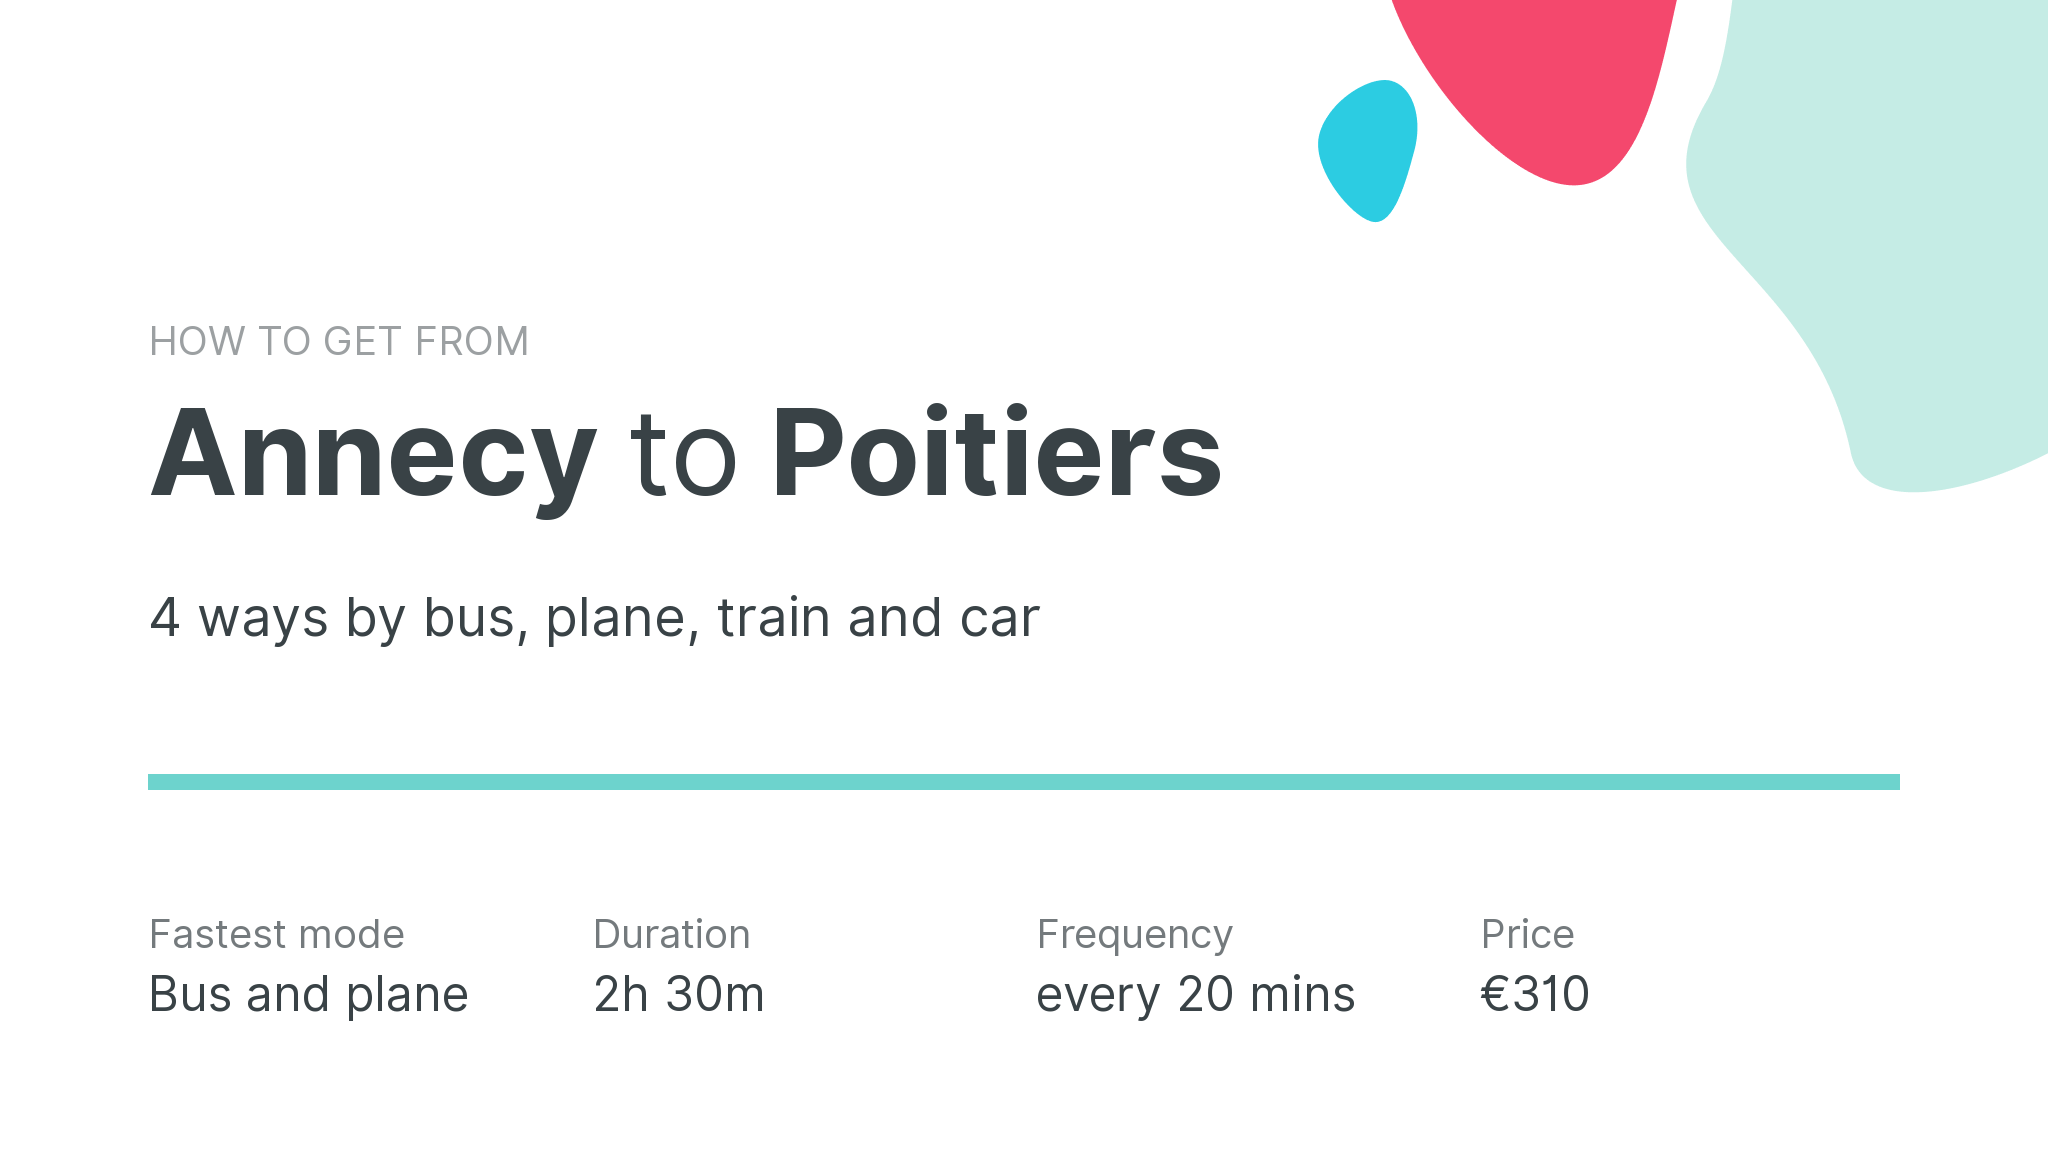 How do I get from Annecy to Poitiers